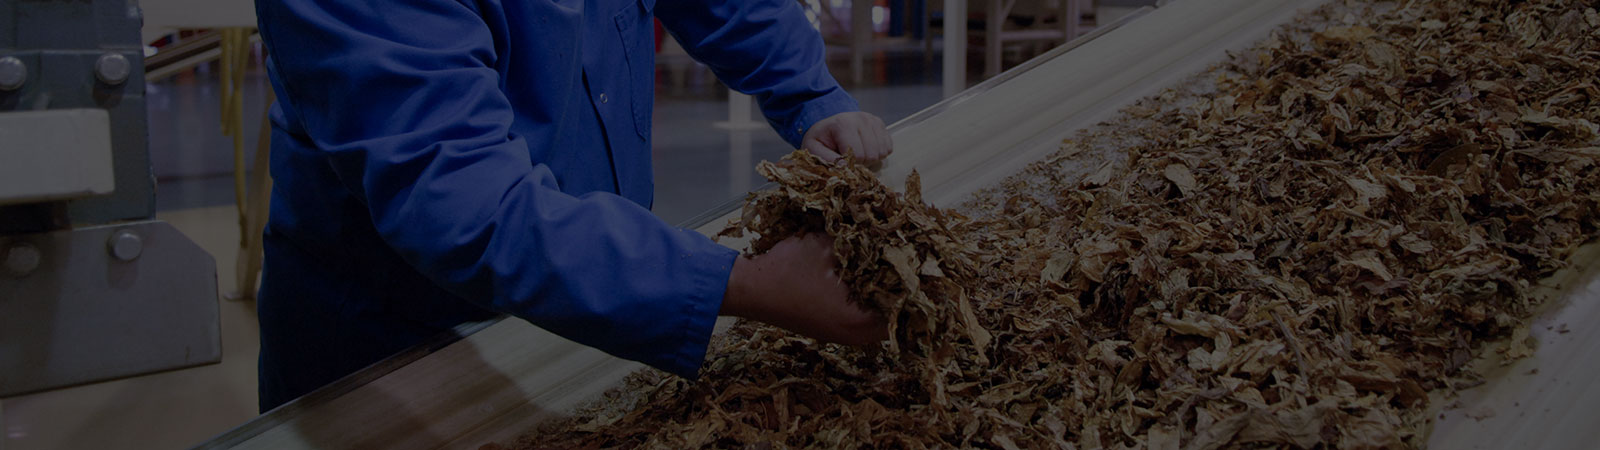 Serialization and Aggregation Solutions for Tobacco Industry